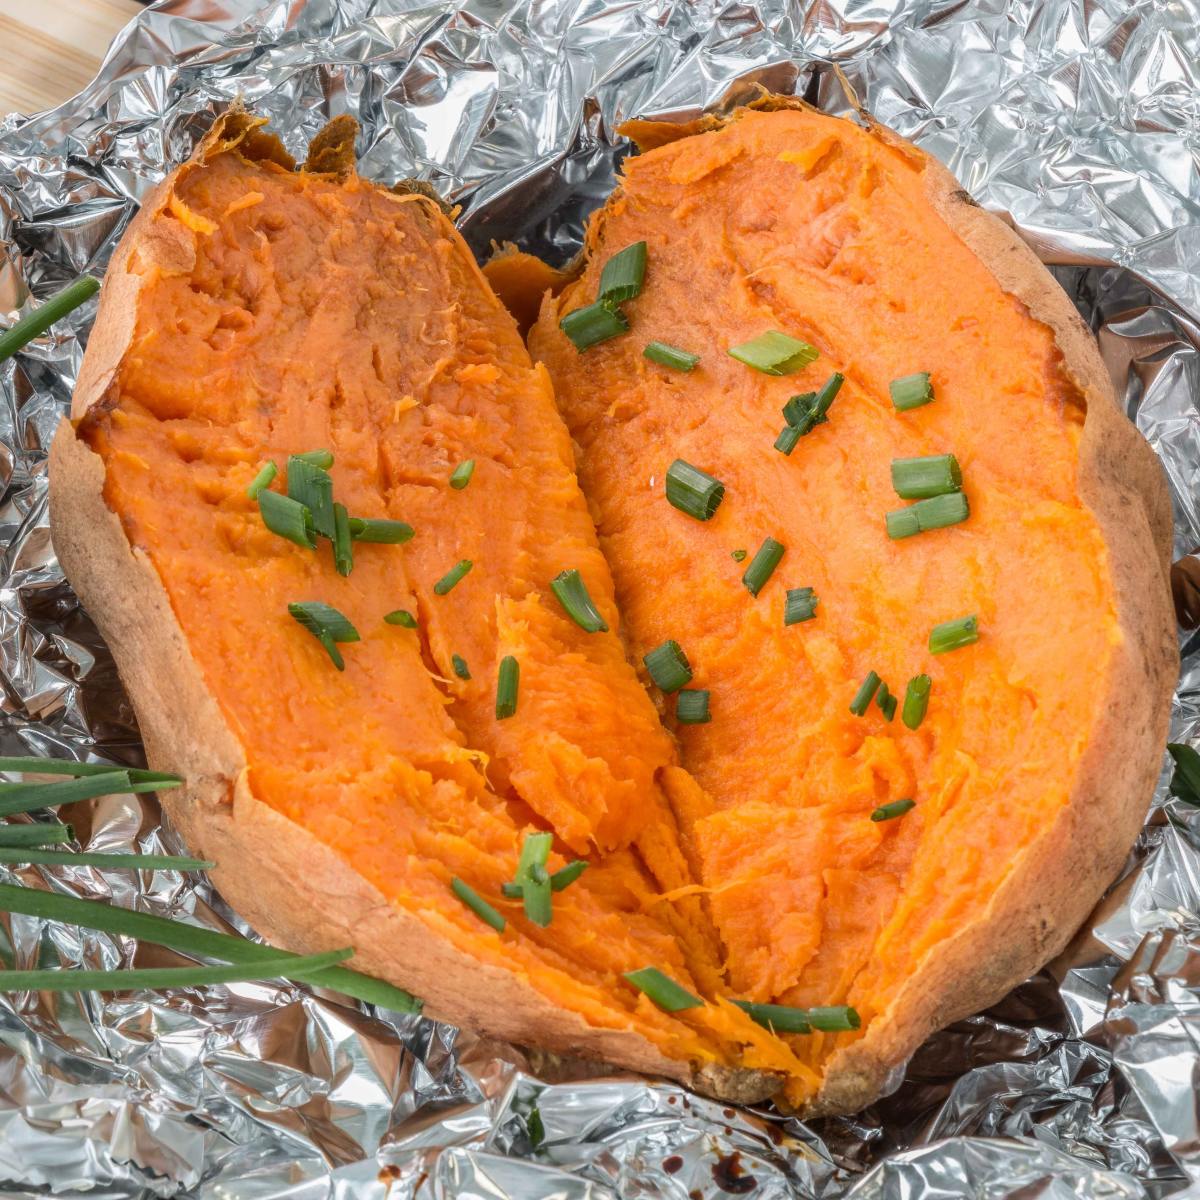 The Health and Disadvantages of Eating Sweet Potatoes